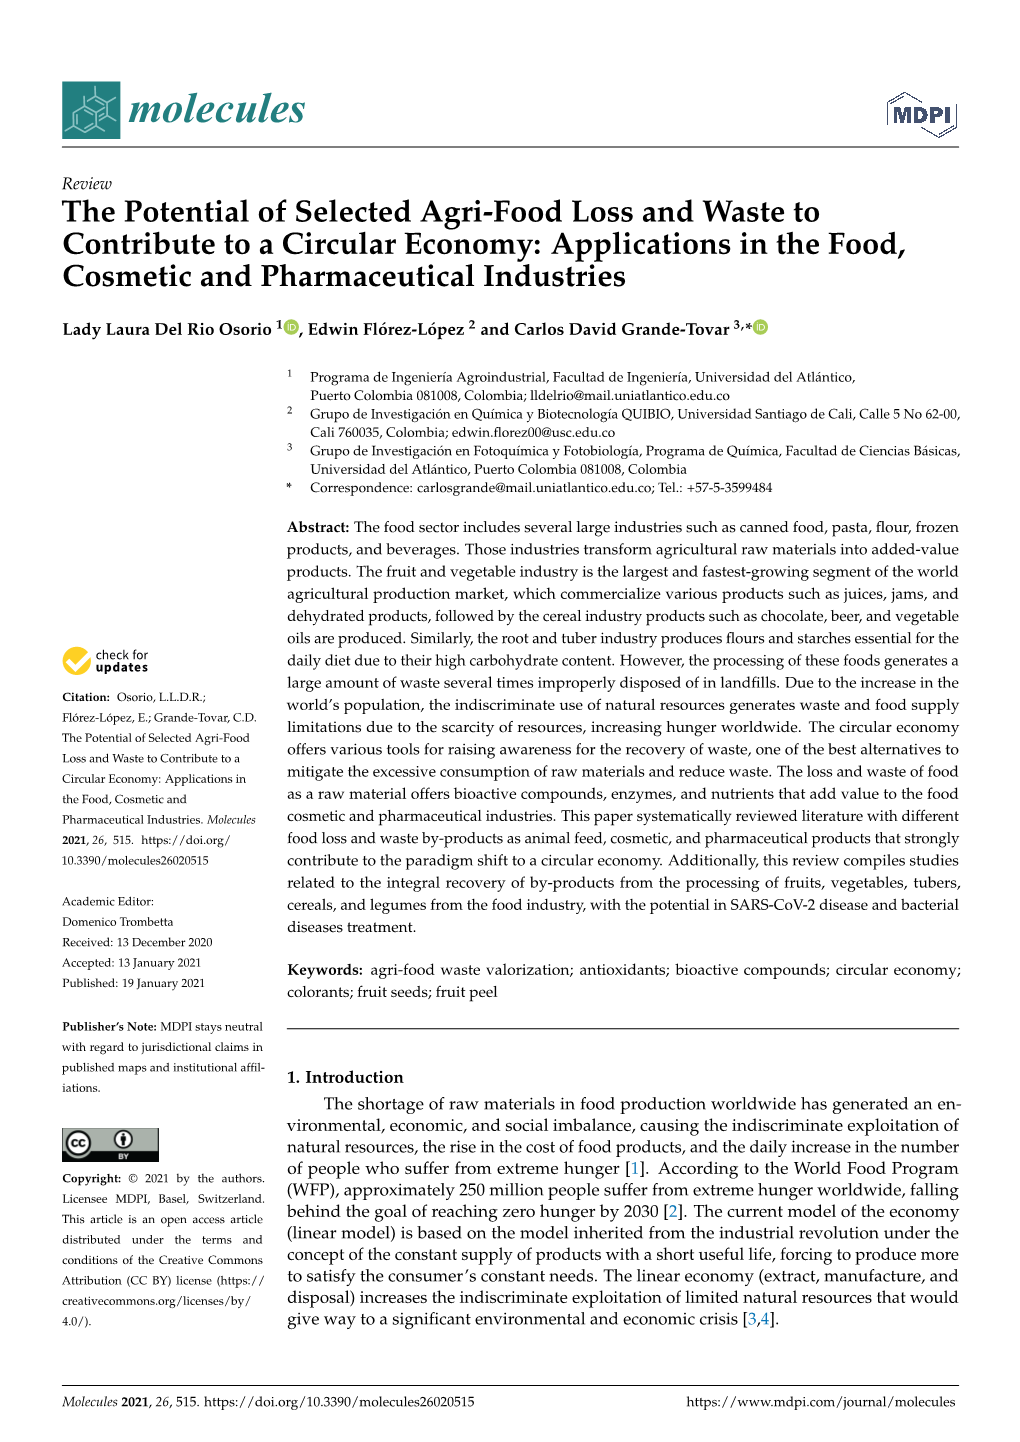 The Potential of Selected Agri-Food Loss and Waste to Contribute to a Circular Economy: Applications in the Food, Cosmetic and Pharmaceutical Industries